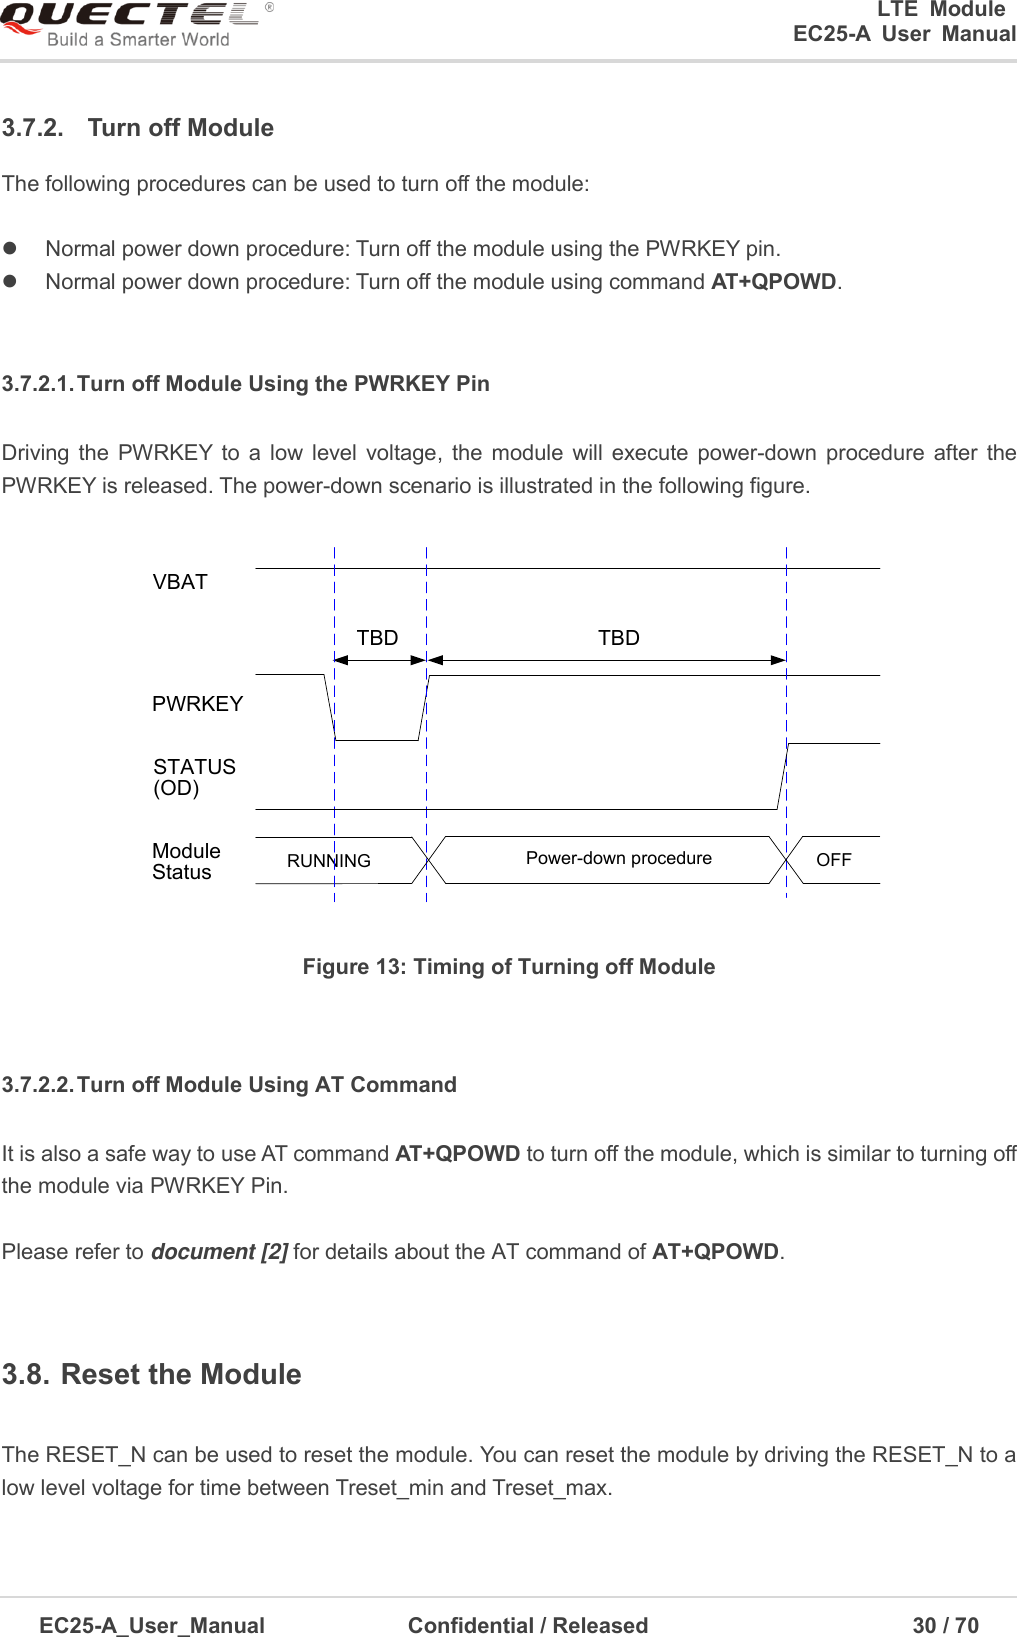 0      LTE  Module      EC25-A  User  Manual EC25-A_User_Manual  Confidential / Released      30 / 7  3.7.2.  Turn off Module The following procedures can be used to turn off the module: Normal power down procedure: Turn off the module using the PWRKEY pin.Normal power down procedure: Turn off the module using command AT+QPOWD.3.7.2.1. Turn off Module Using the PWRKEY Pin Driving  the  PWRKEY to  a  low  level  voltage,  the  module  will  execute  power-down  procedure  after  the PWRKEY is released. The power-down scenario is illustrated in the following figure. VBATPWRKEYTBDTBDRUNNING Power-down procedure OFFModuleStatusSTATUS(OD)Figure 13: Timing of Turning off Module 3.7.2.2. Turn off Module Using AT Command It is also a safe way to use AT command AT+QPOWD to turn off the module, which is similar to turning off the module via PWRKEY Pin.   Please refer to document [2] for details about the AT command of AT+QPOWD. 3.8. Reset the Module The RESET_N can be used to reset the module. You can reset the module by driving the RESET_N to a low level voltage for time between Treset_min and Treset_max. 